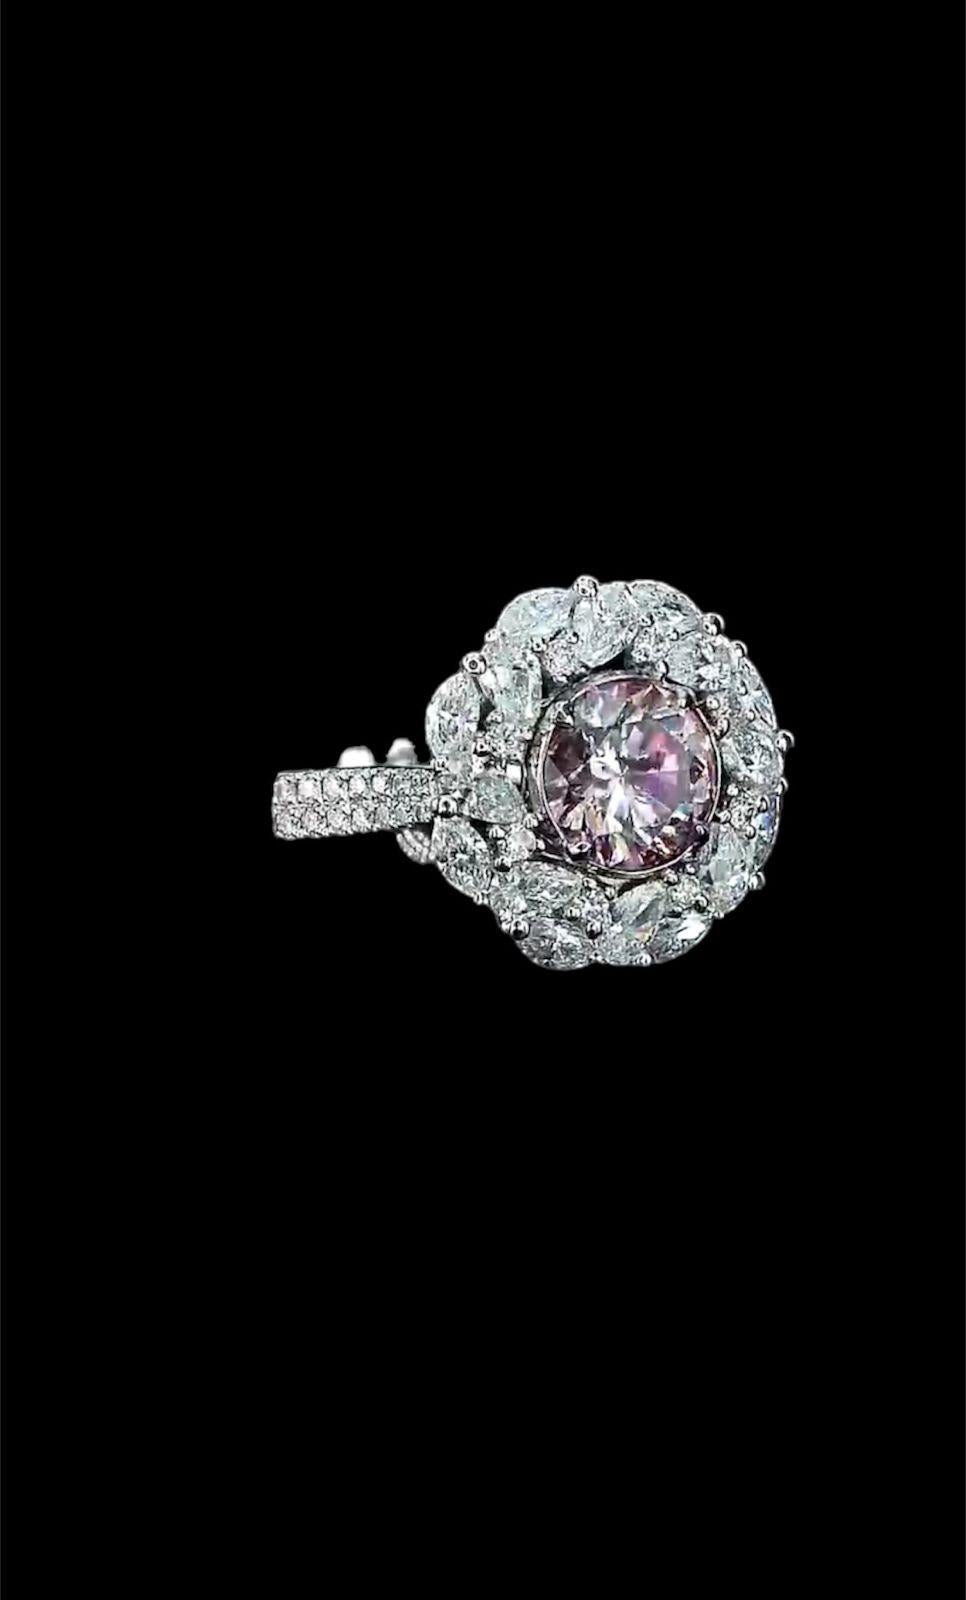 GIA Certified 1.01 Carat Light Pink Diamond Ring  For Sale 7